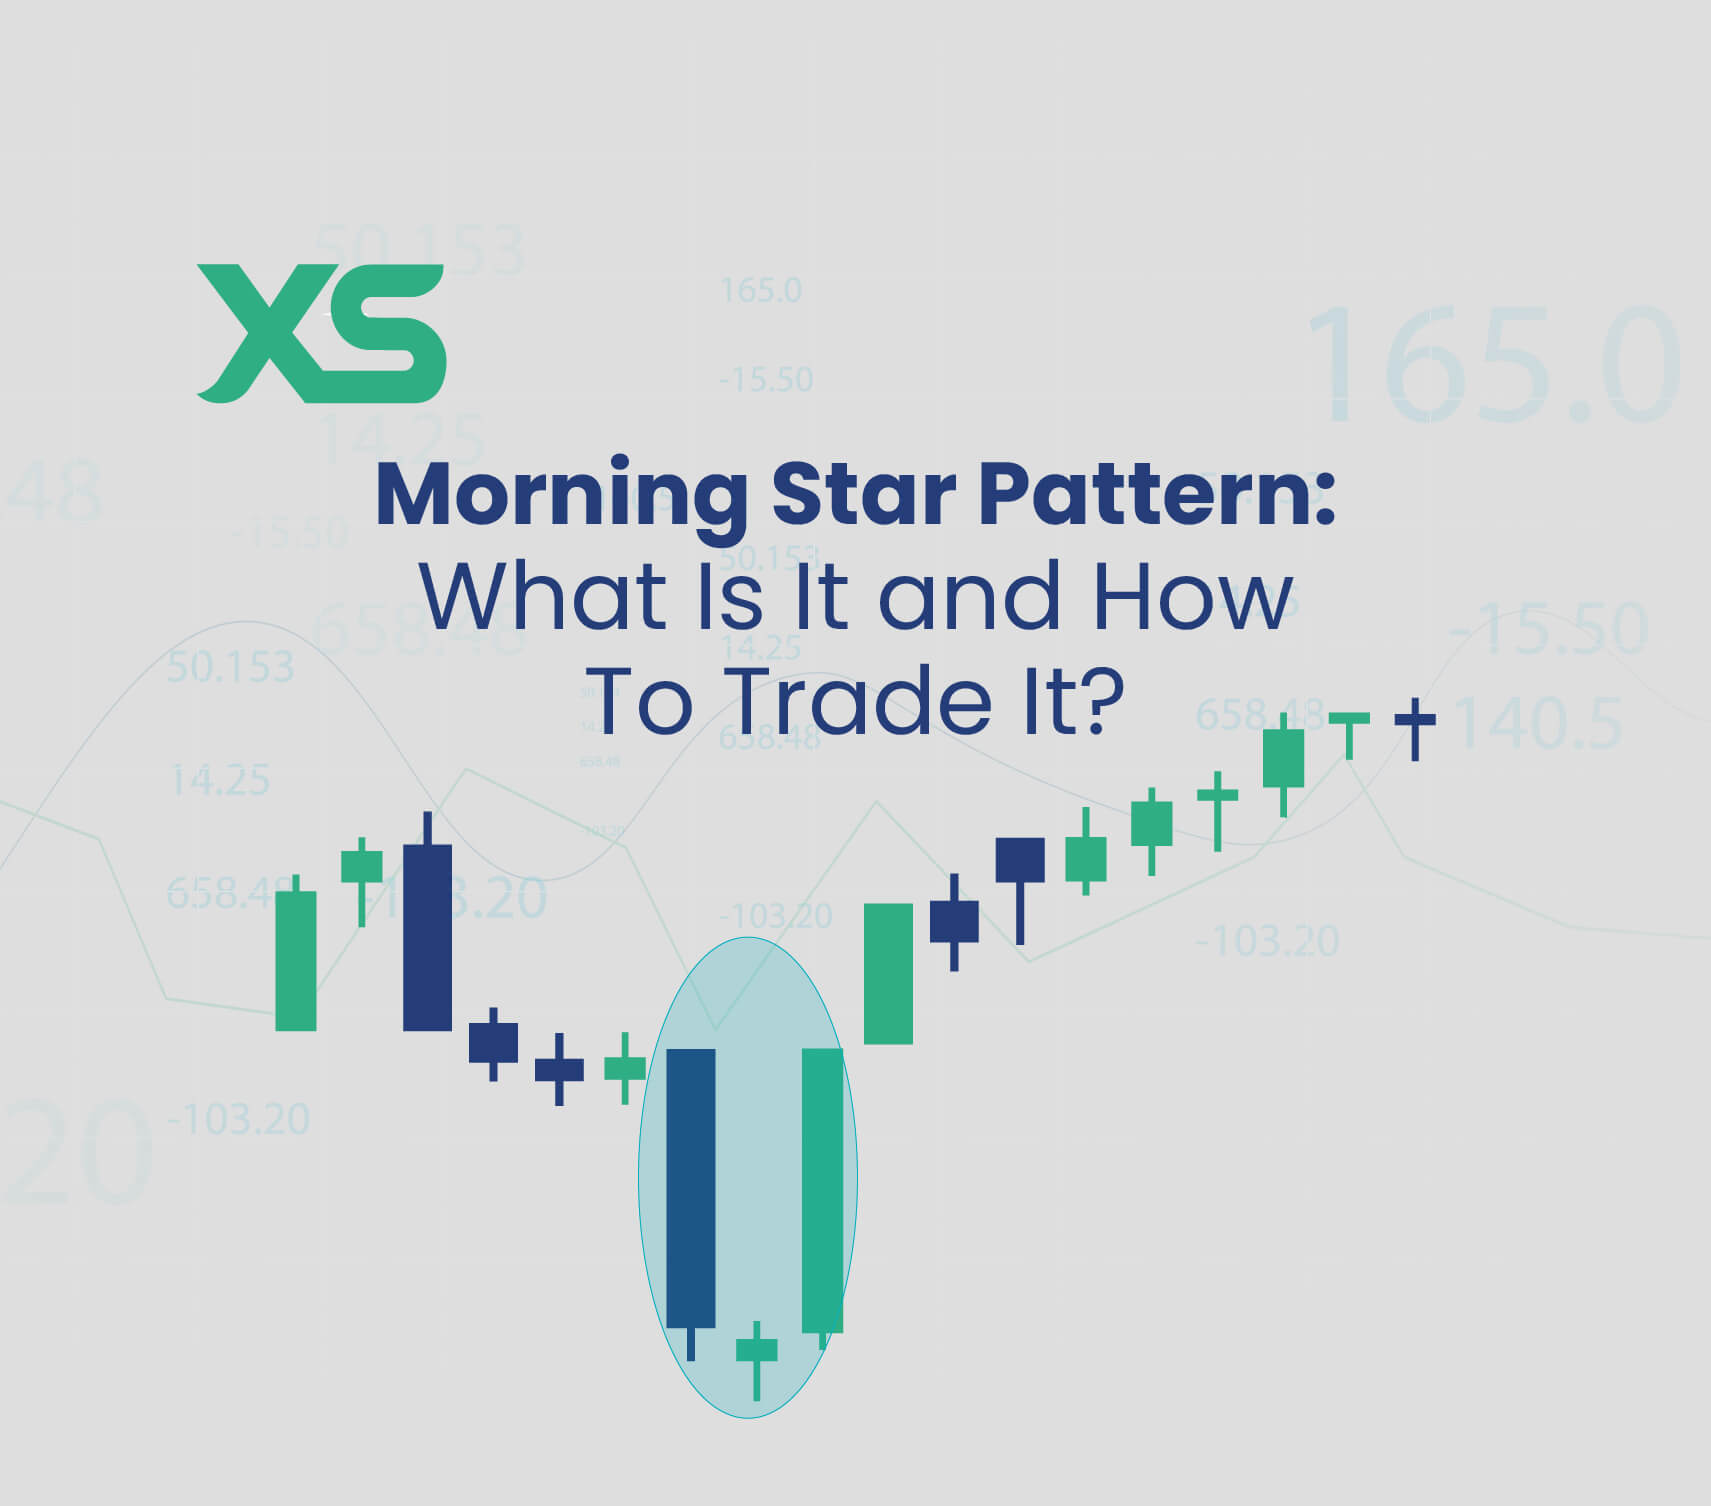 Morning Star Pattern: What Is It and How To Trade It?